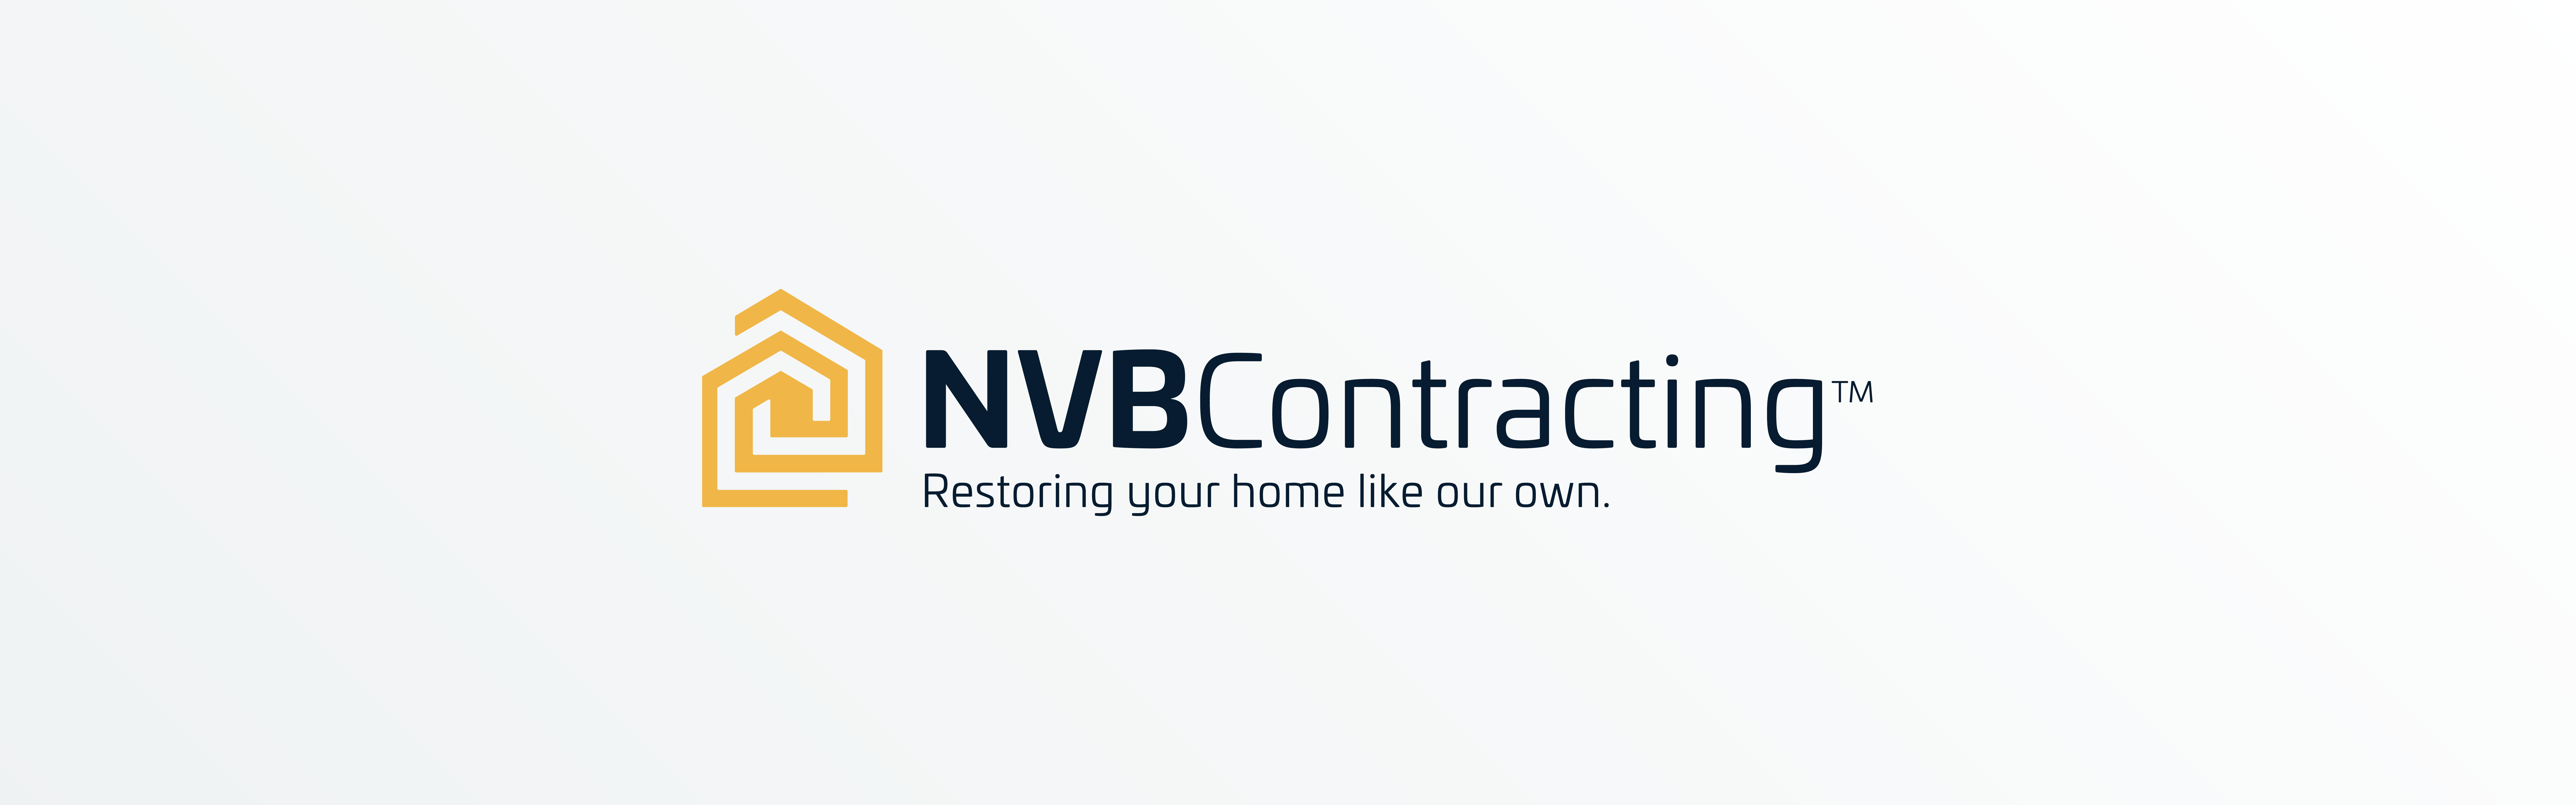 NVB Contracting logo design